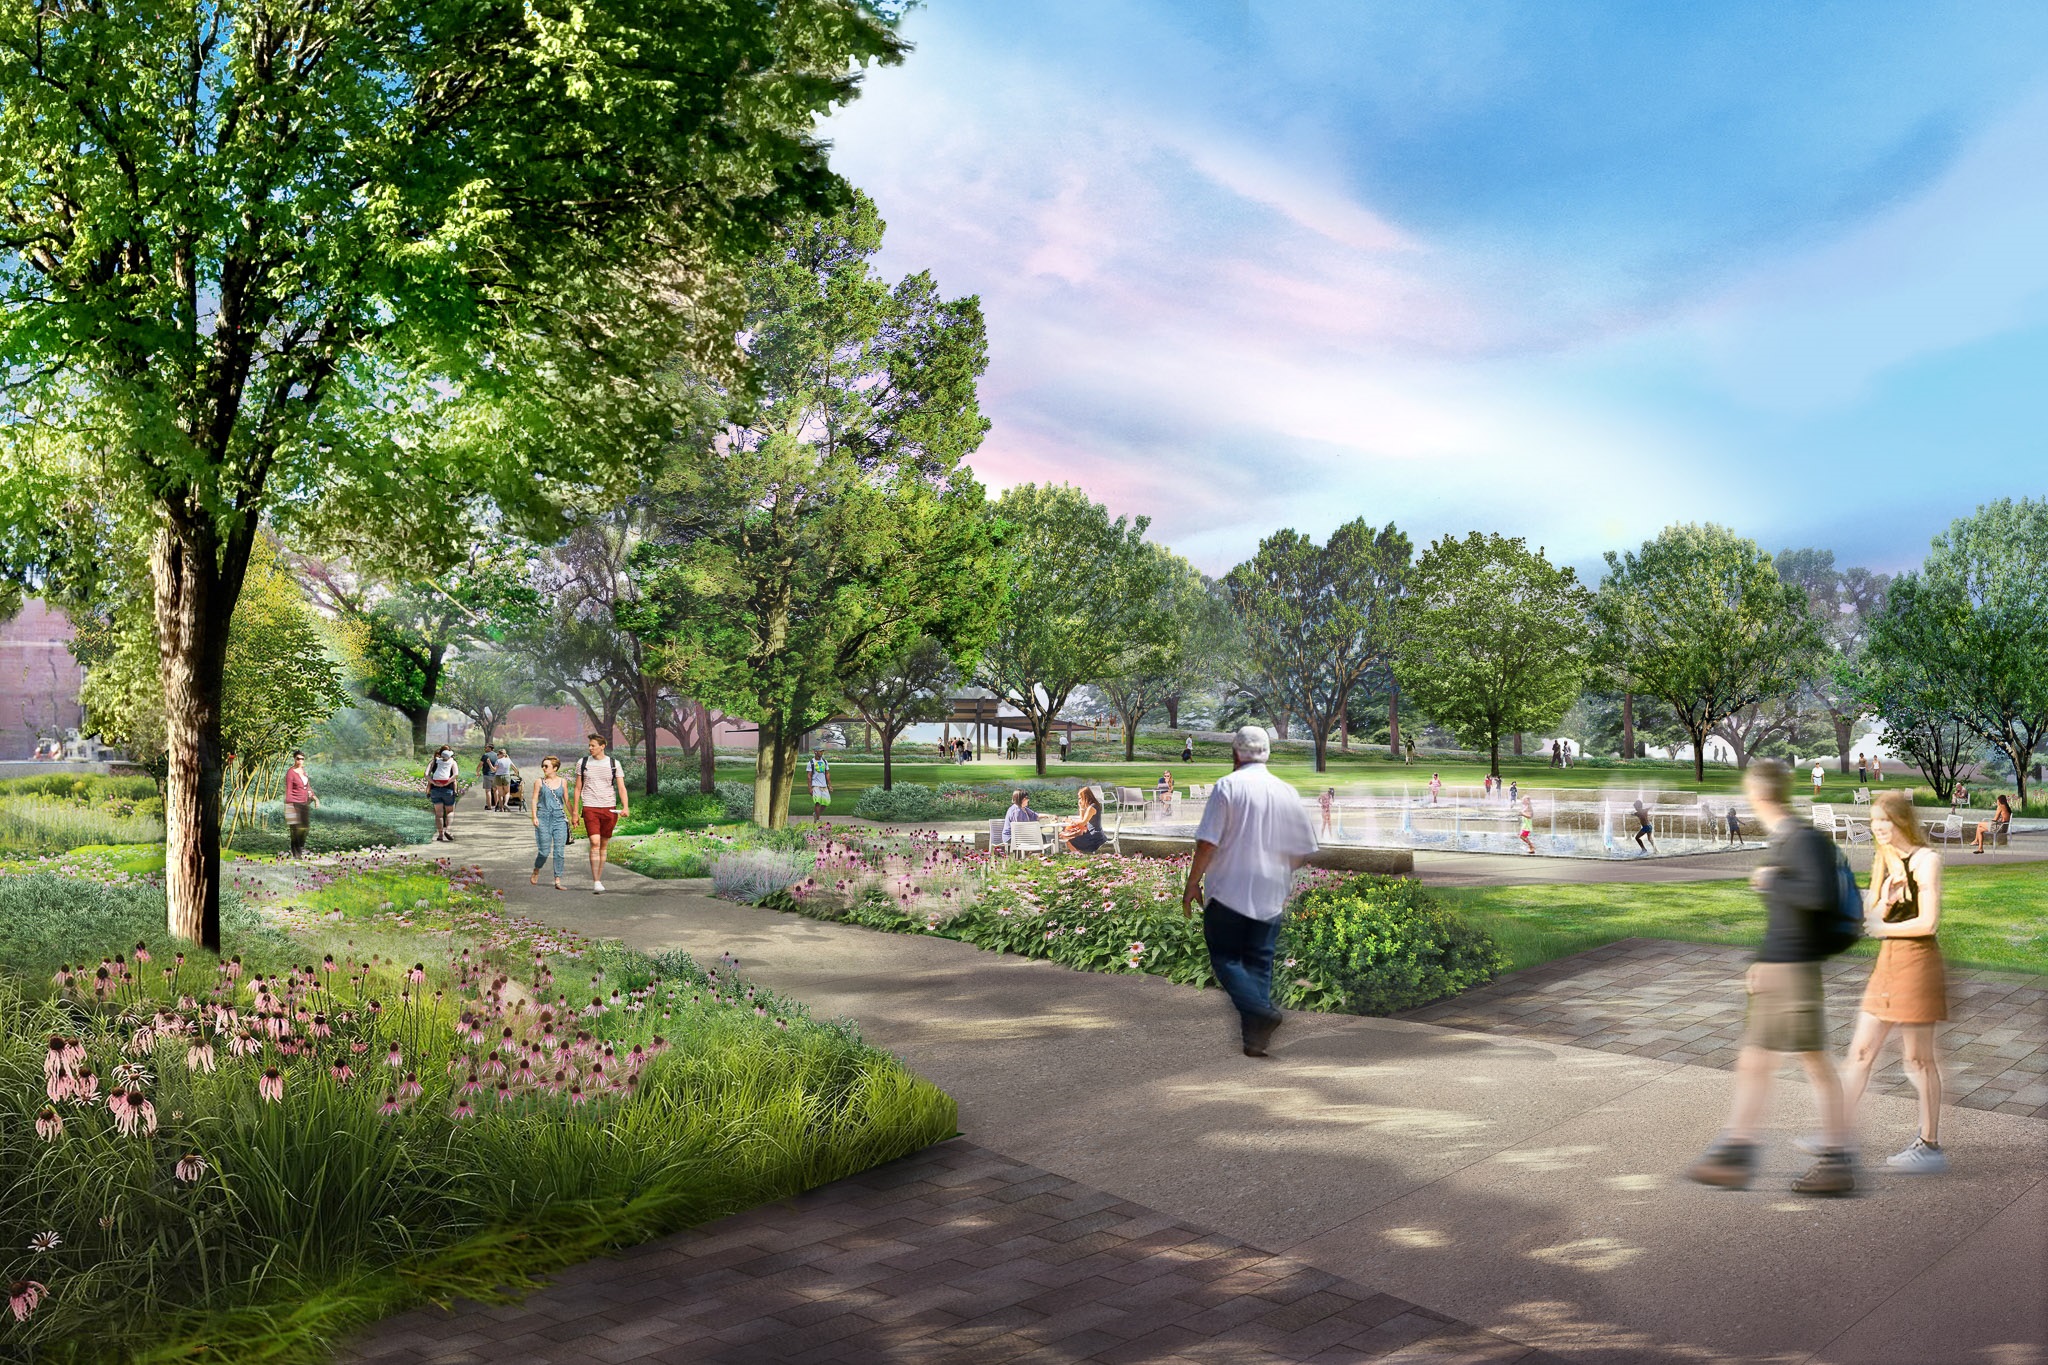 South Haymarket Park includes a Common Ground Plaza and a fun interactive water feature.